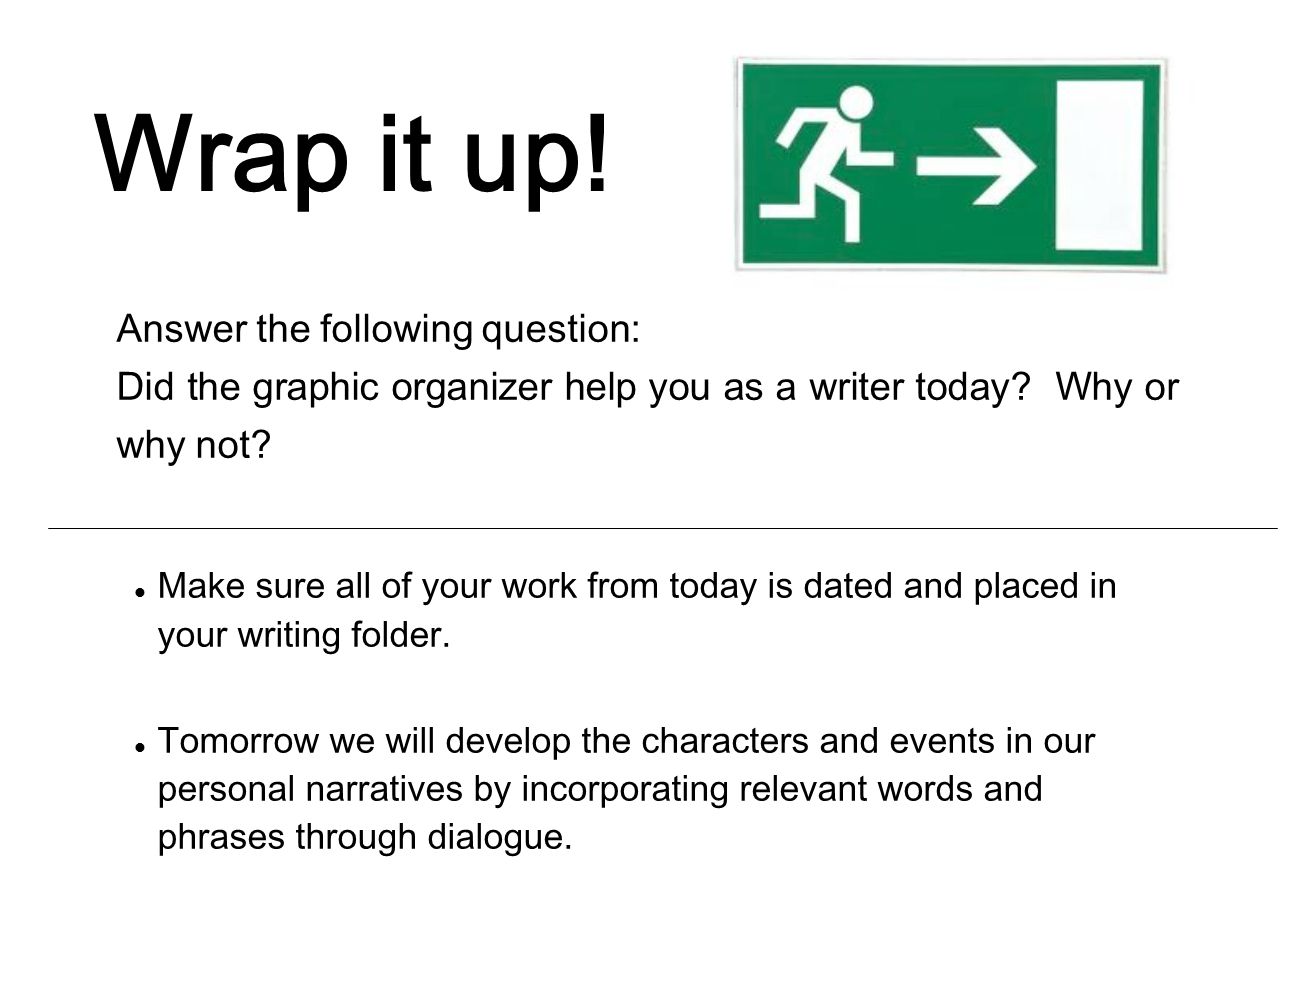 Answer the following question: Did the graphic organizer help you as a writer today.